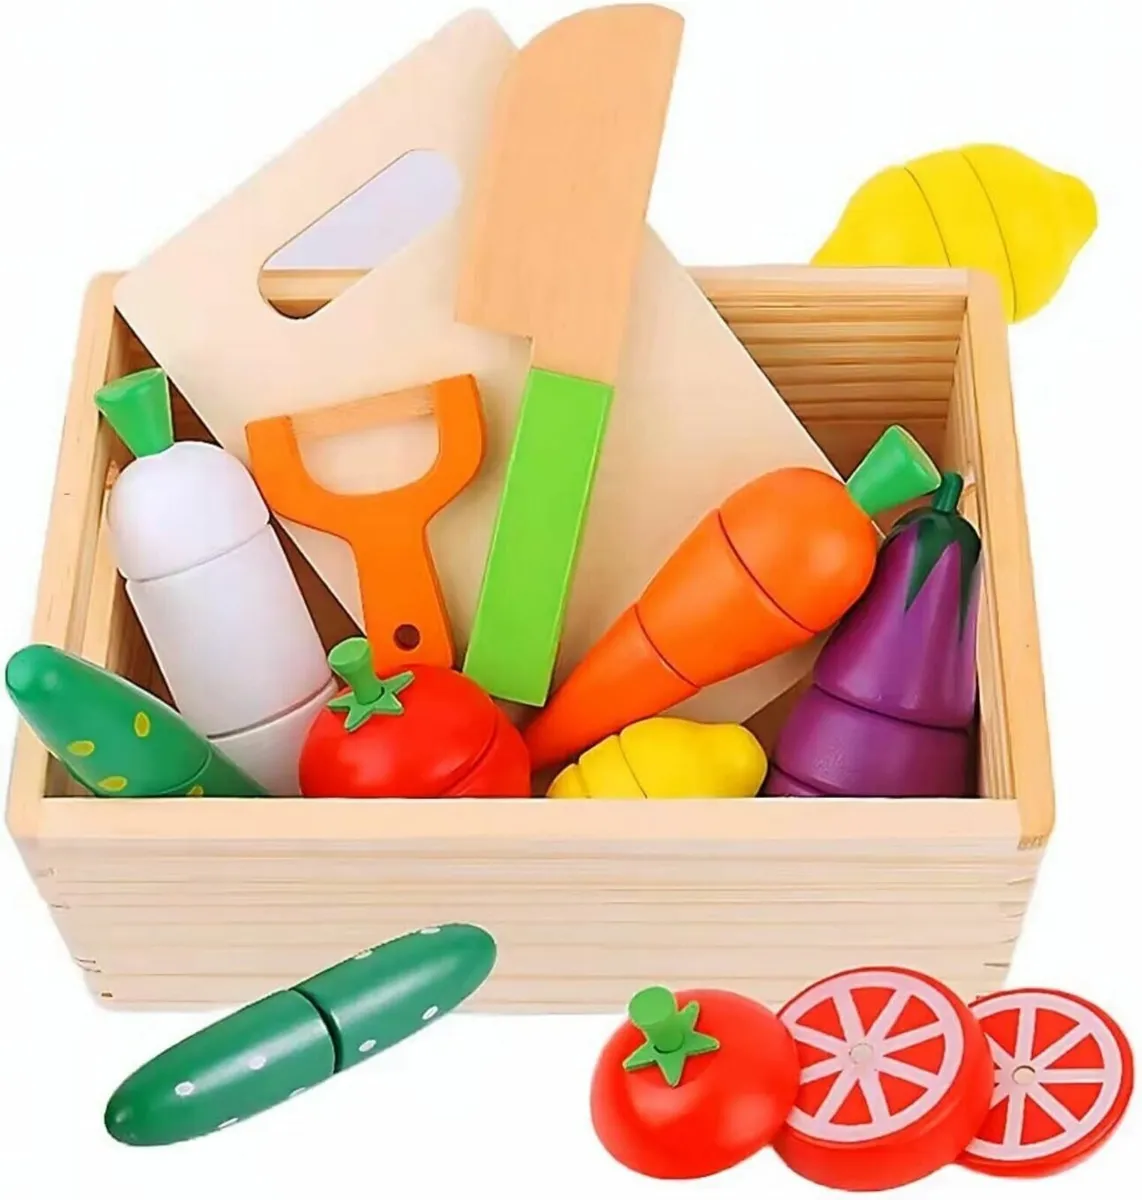 Wooden Kitchen Cut Food Kids Toy, Fruits and Vegs